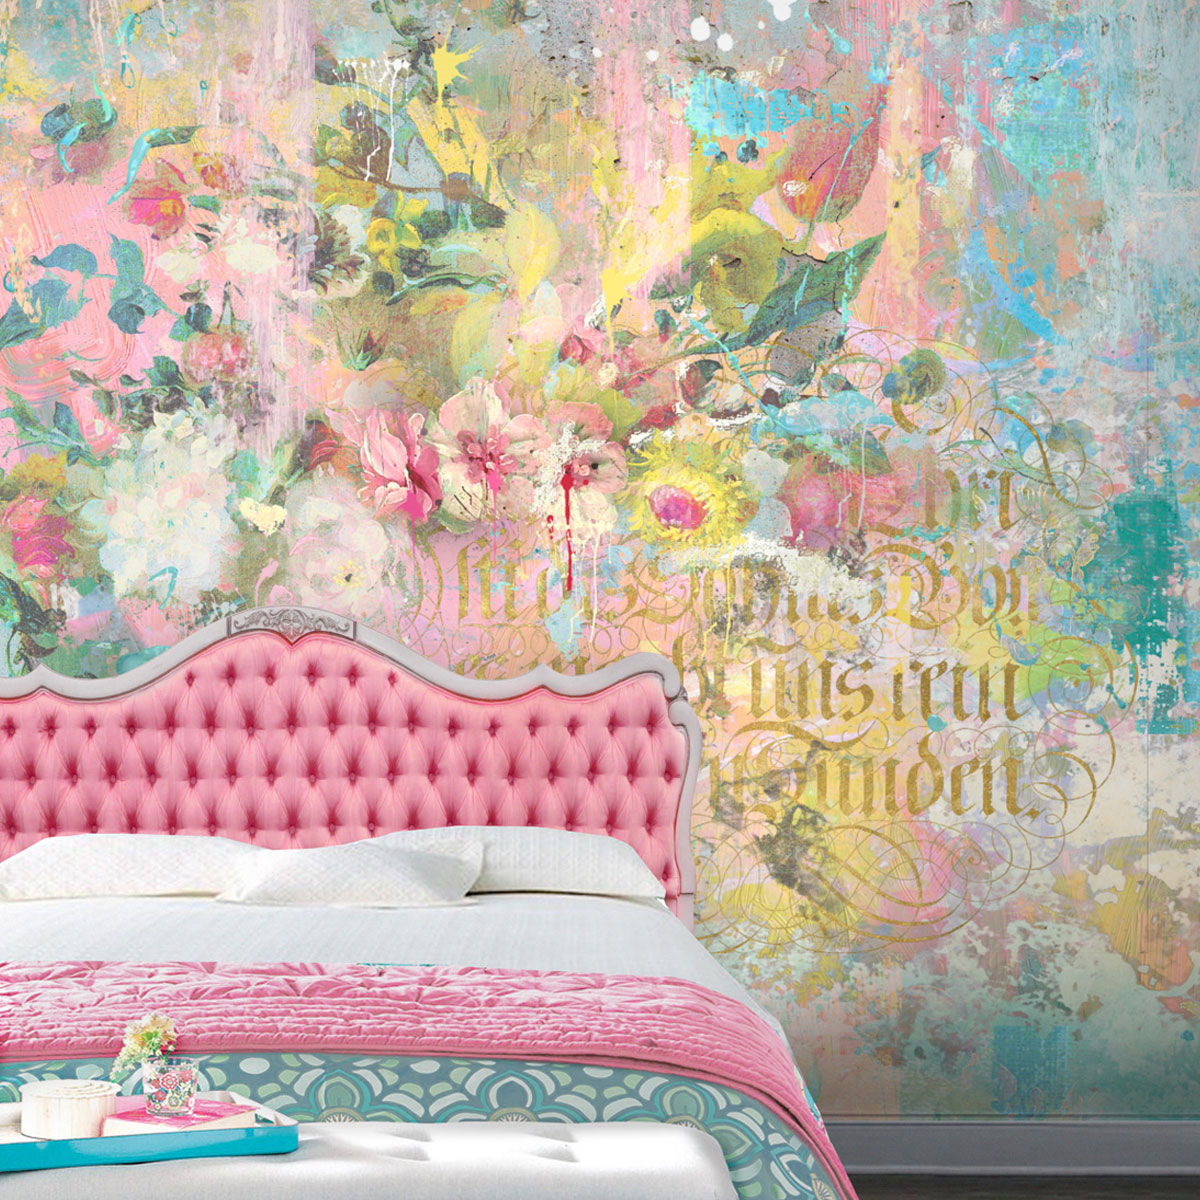 Paint & Gilt Wall Mural for a Teen Bedroom by Back to the Wall